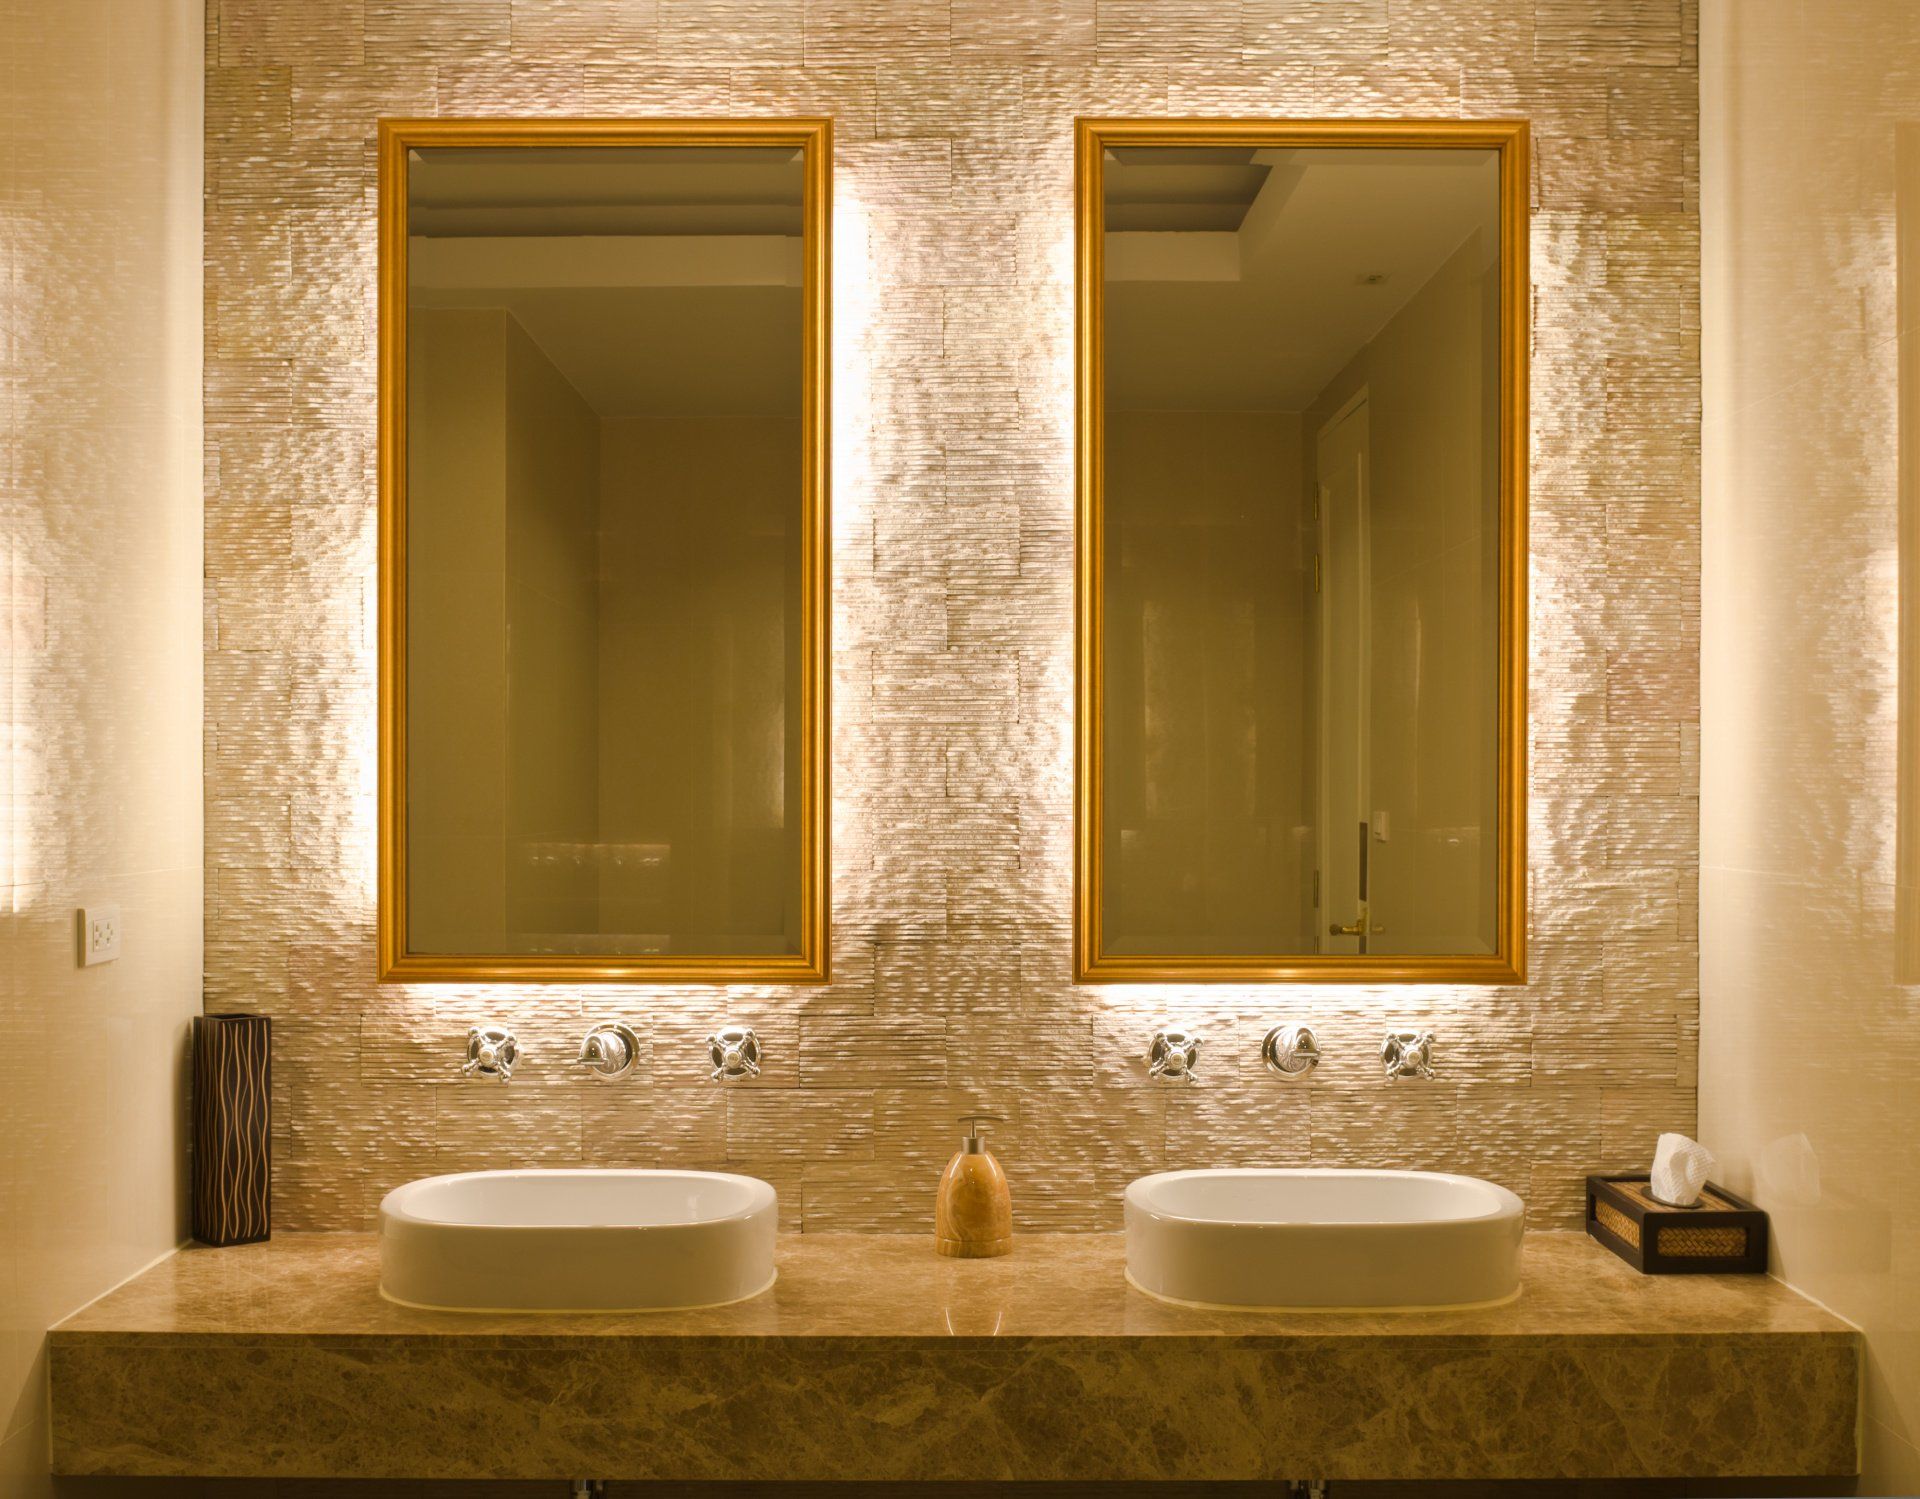 Lighted Bathroom Mirrors Are They, Cost To Install Bathroom Vanity Light